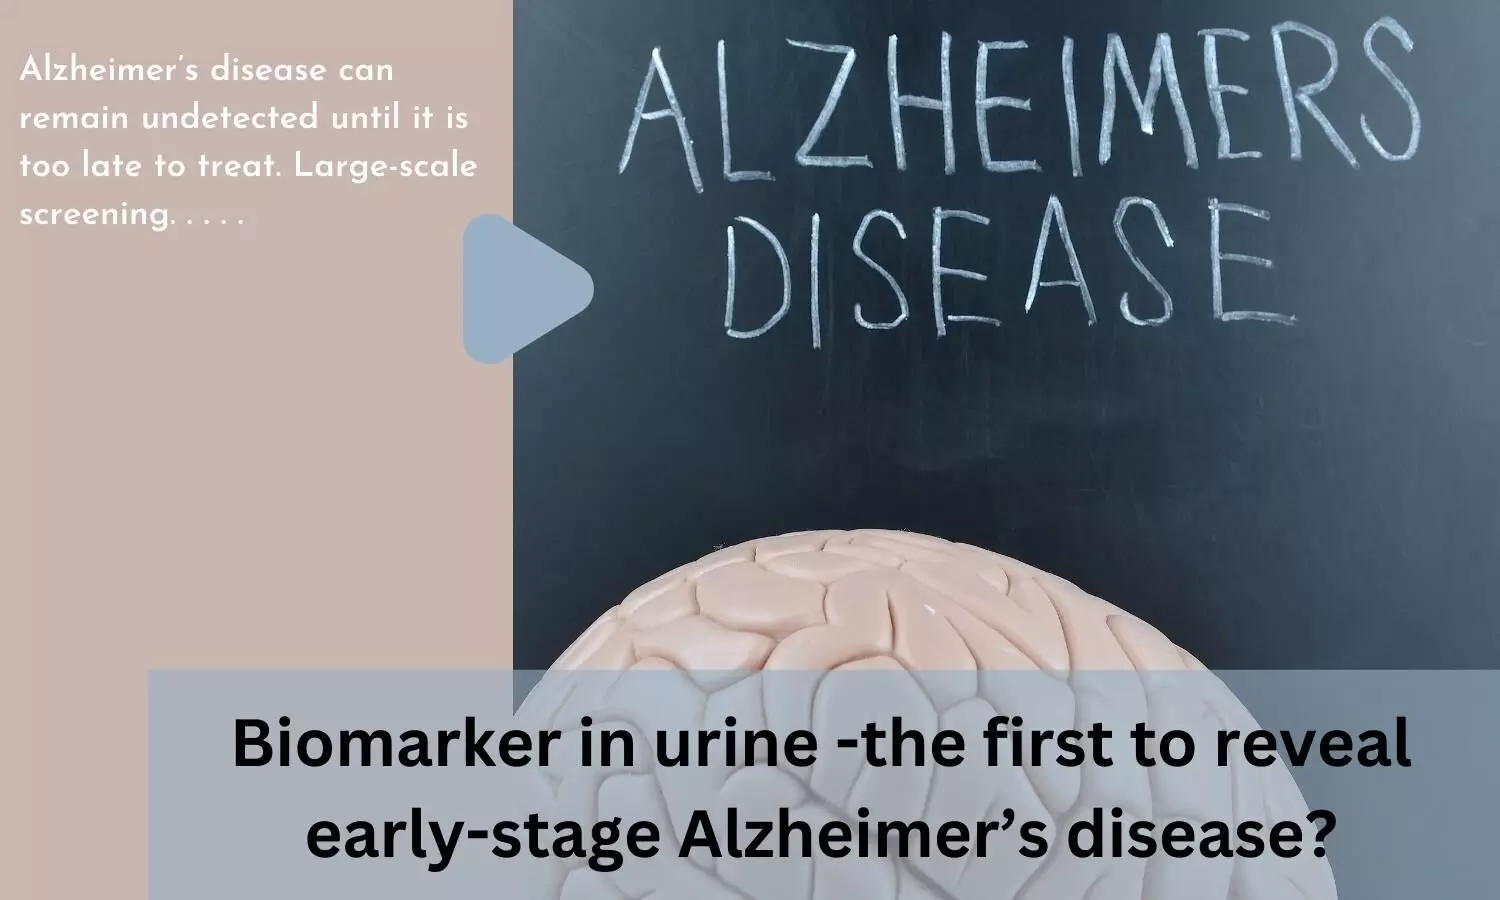 Biomarker in urine -the first to reveal early-stage Alzheimers disease?